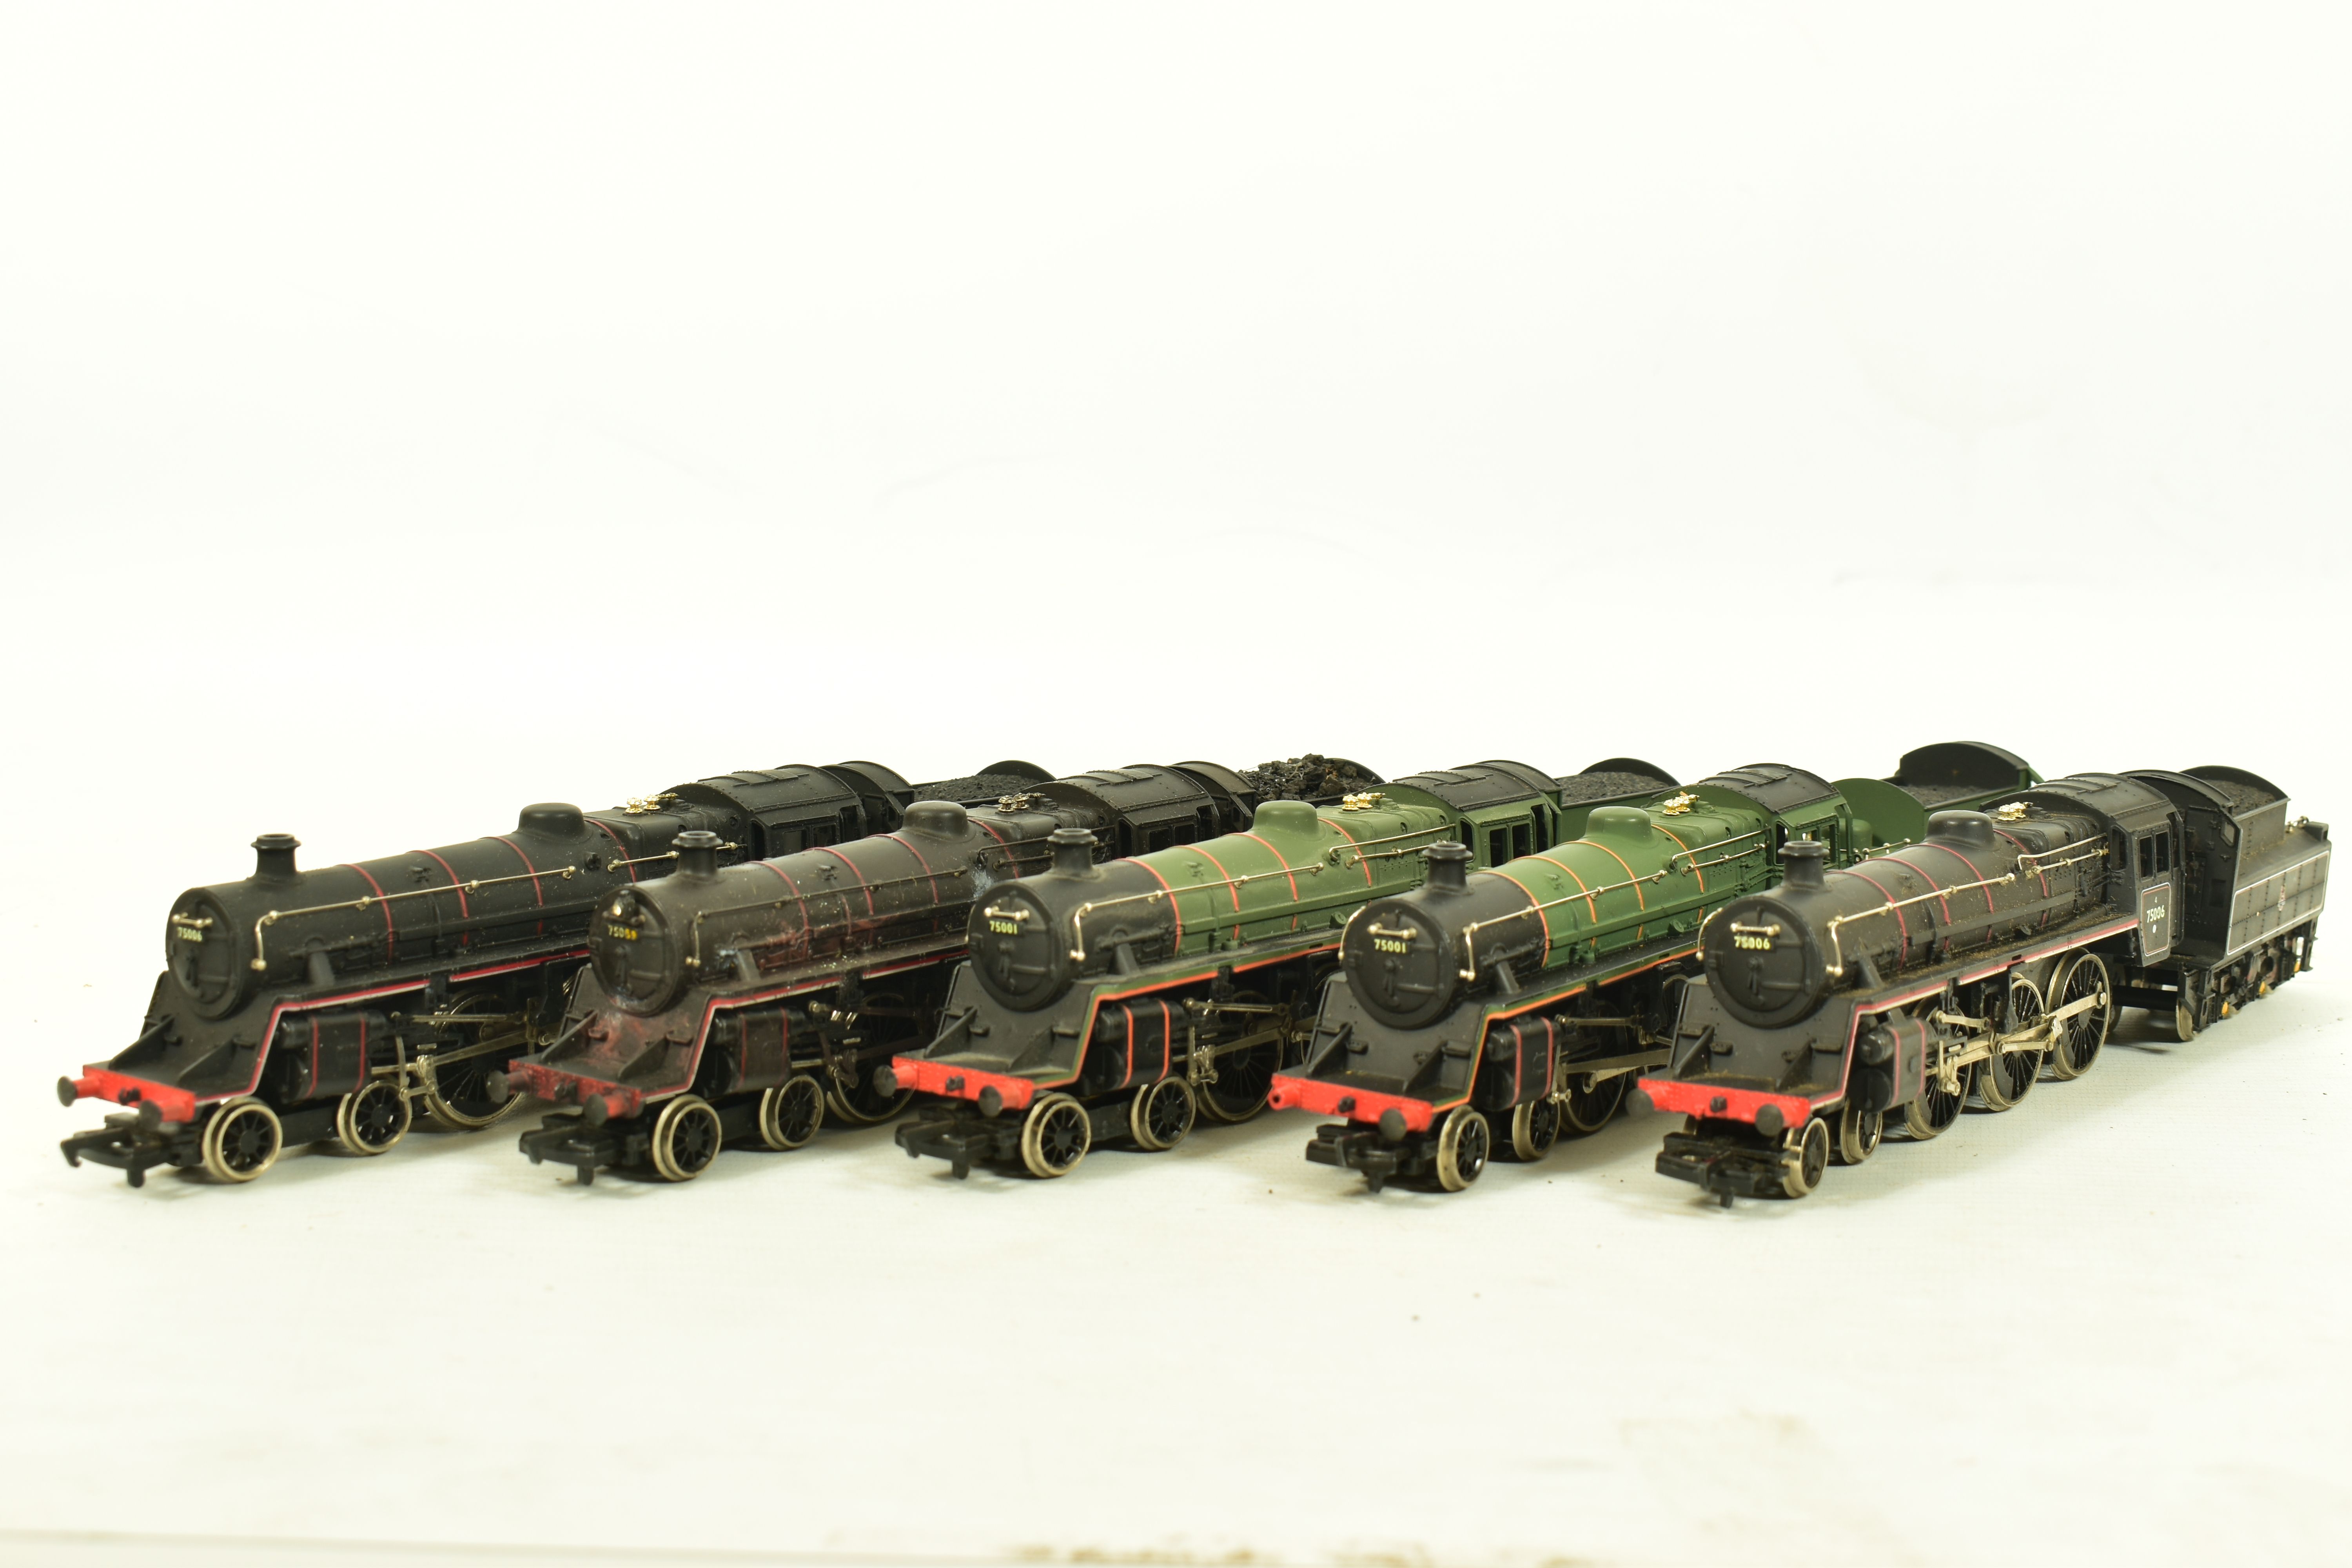 FIVE BOXED MAINLINE OO GAUGE STANDARD CLASS 4 LOCOMOTIVES, 2 x No.75001, B.R. lined green livery (37